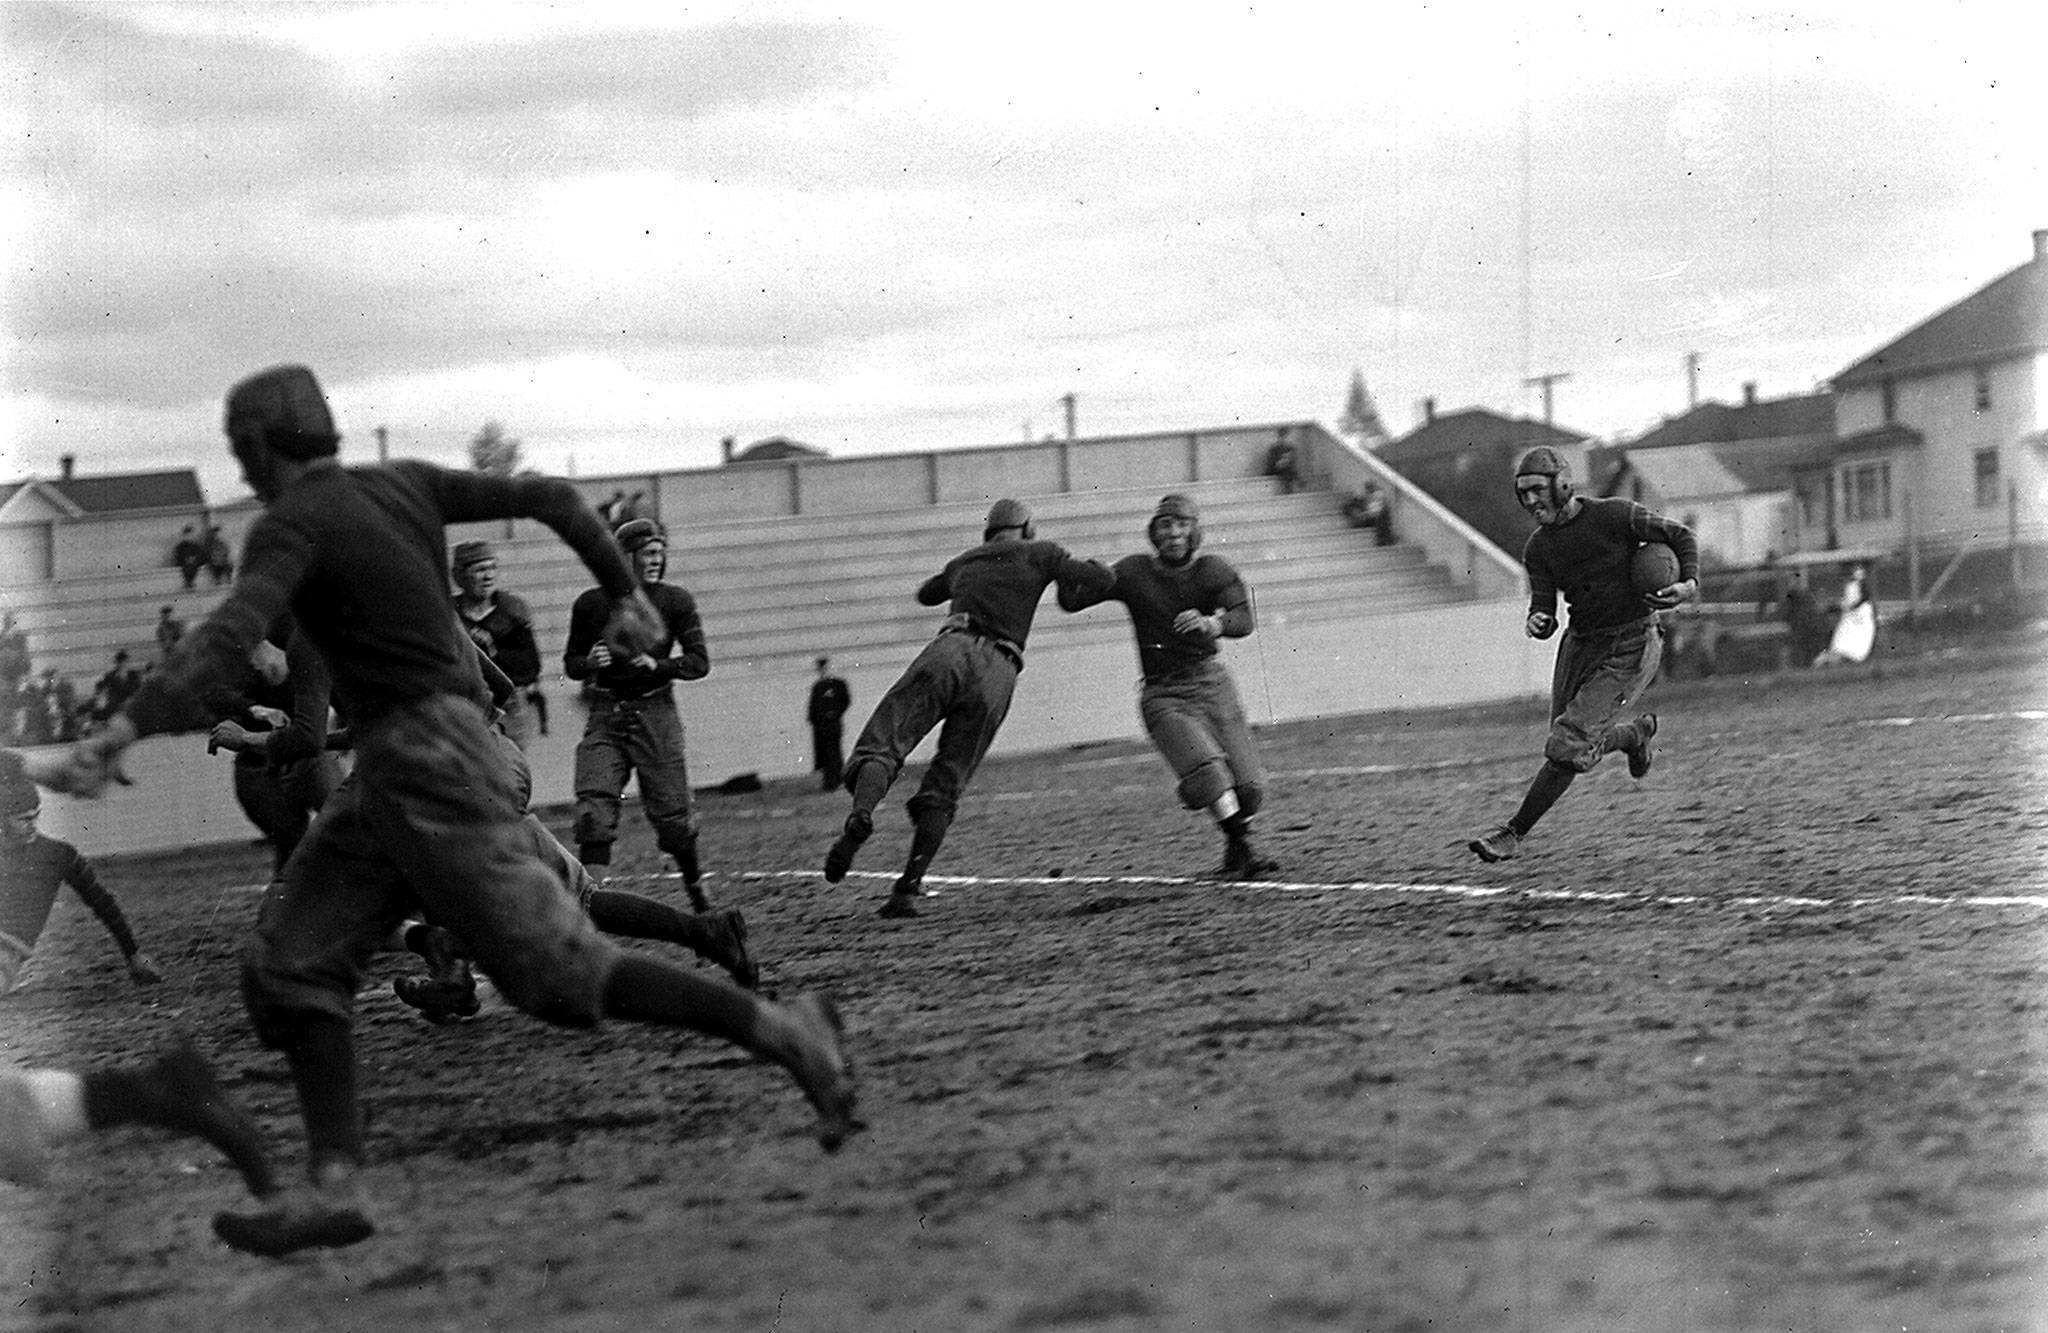 This Oct. 4, 1913 photo shows the Everett High School team in a game against Bellingham at Athletic Park Field. Dan Michel is carrying the ball. (J. A. Juleen/Everett Public Library)